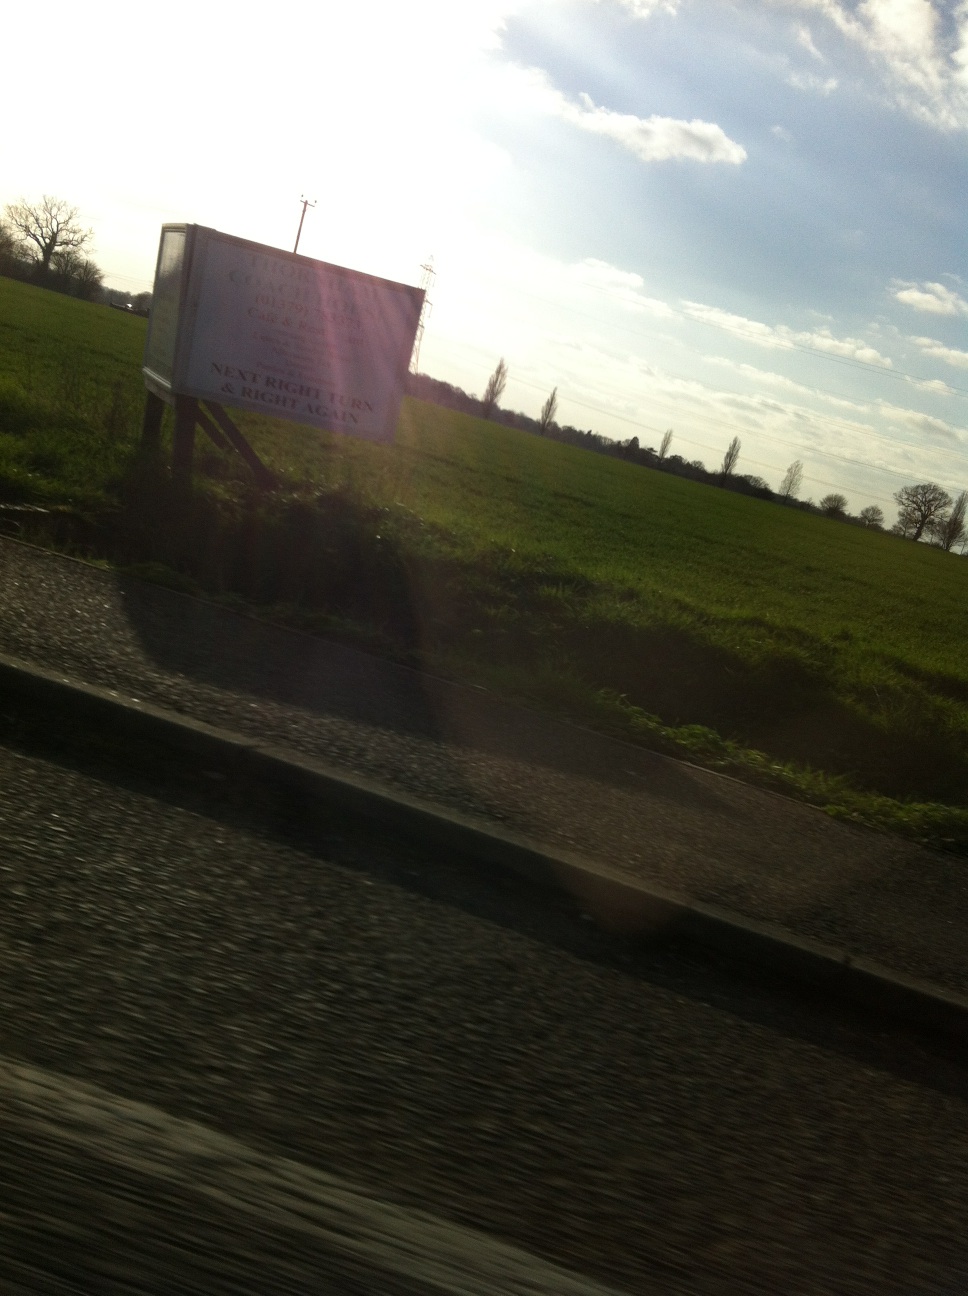 A photo captured by a person who is blind. A computer-generated caption for this photo is: There is a sign on the side of the road.